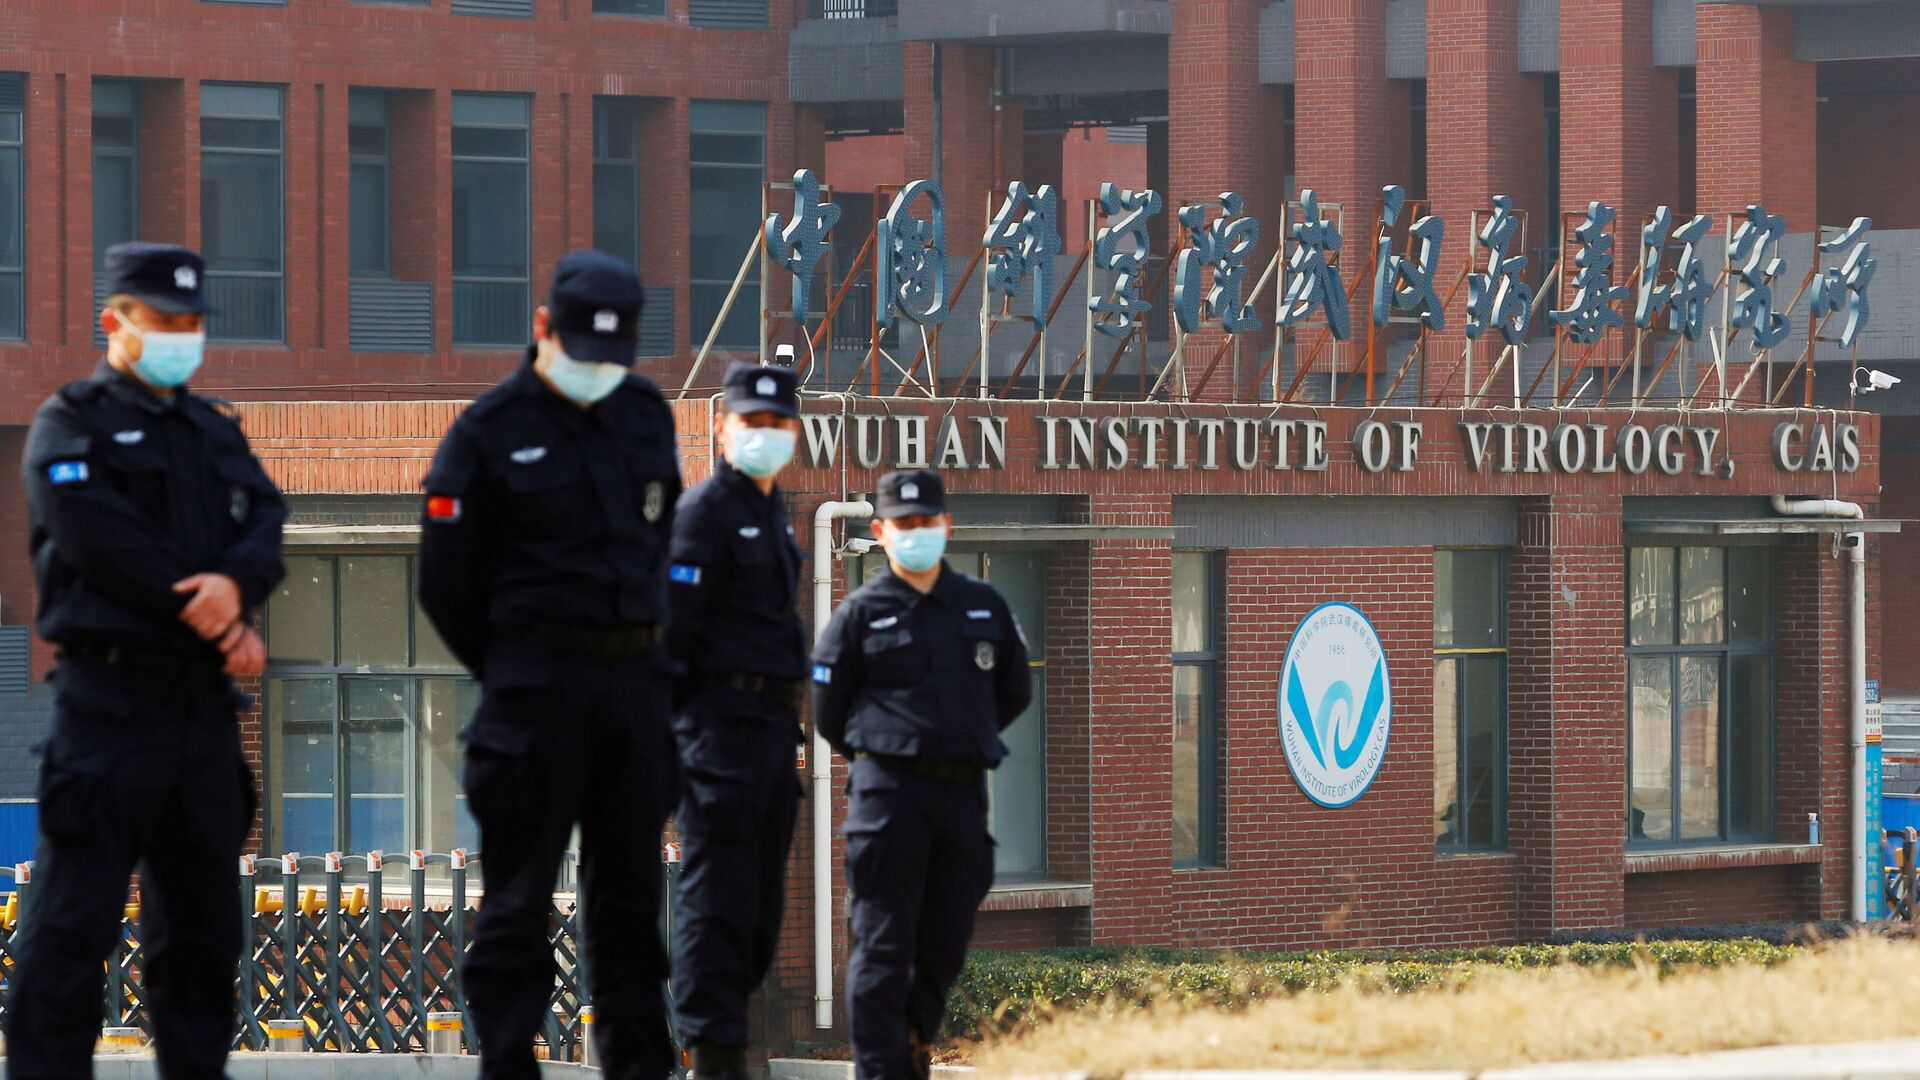 Security personnel keep watch outside the Wuhan Institute of Virology during a visit by the World Health Organisation (WHO) team tasked with investigating the origins of the coronavirus disease (COVID-19), in Wuhan, Hubei Province, China 3 February 2021. - Sputnik International, 1920, 27.05.2021